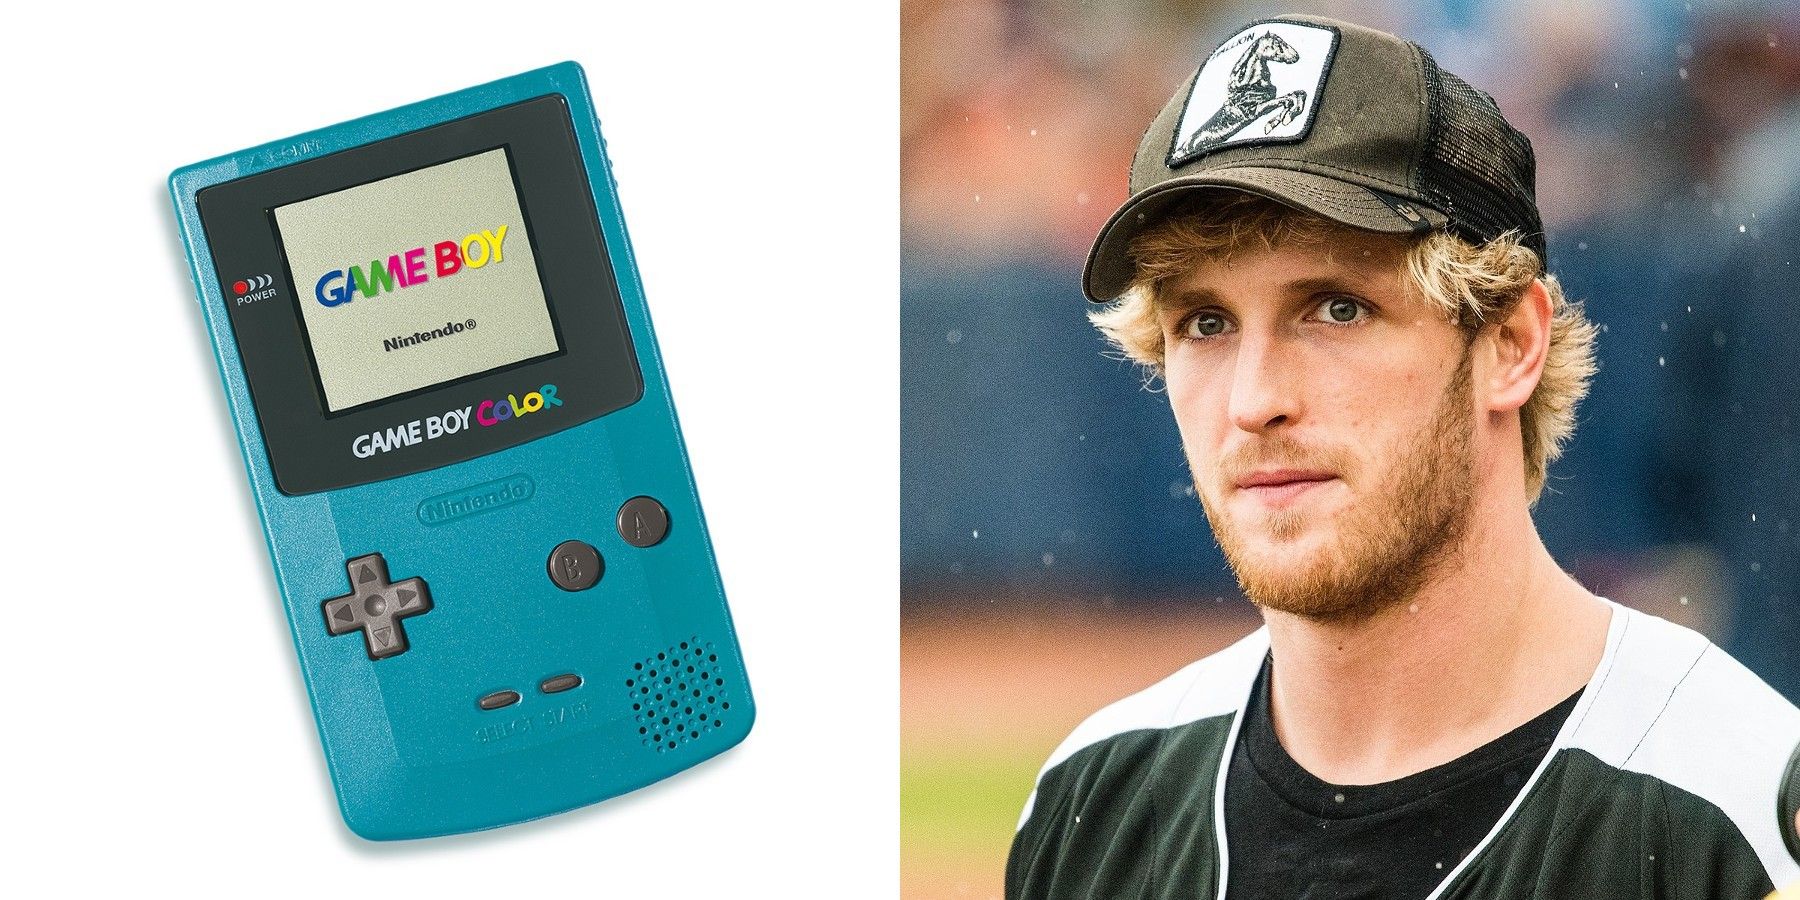 Logan Paul Makes Game Boy Color Tabletop With Epoxy Resin and Metal Pokemon Frame